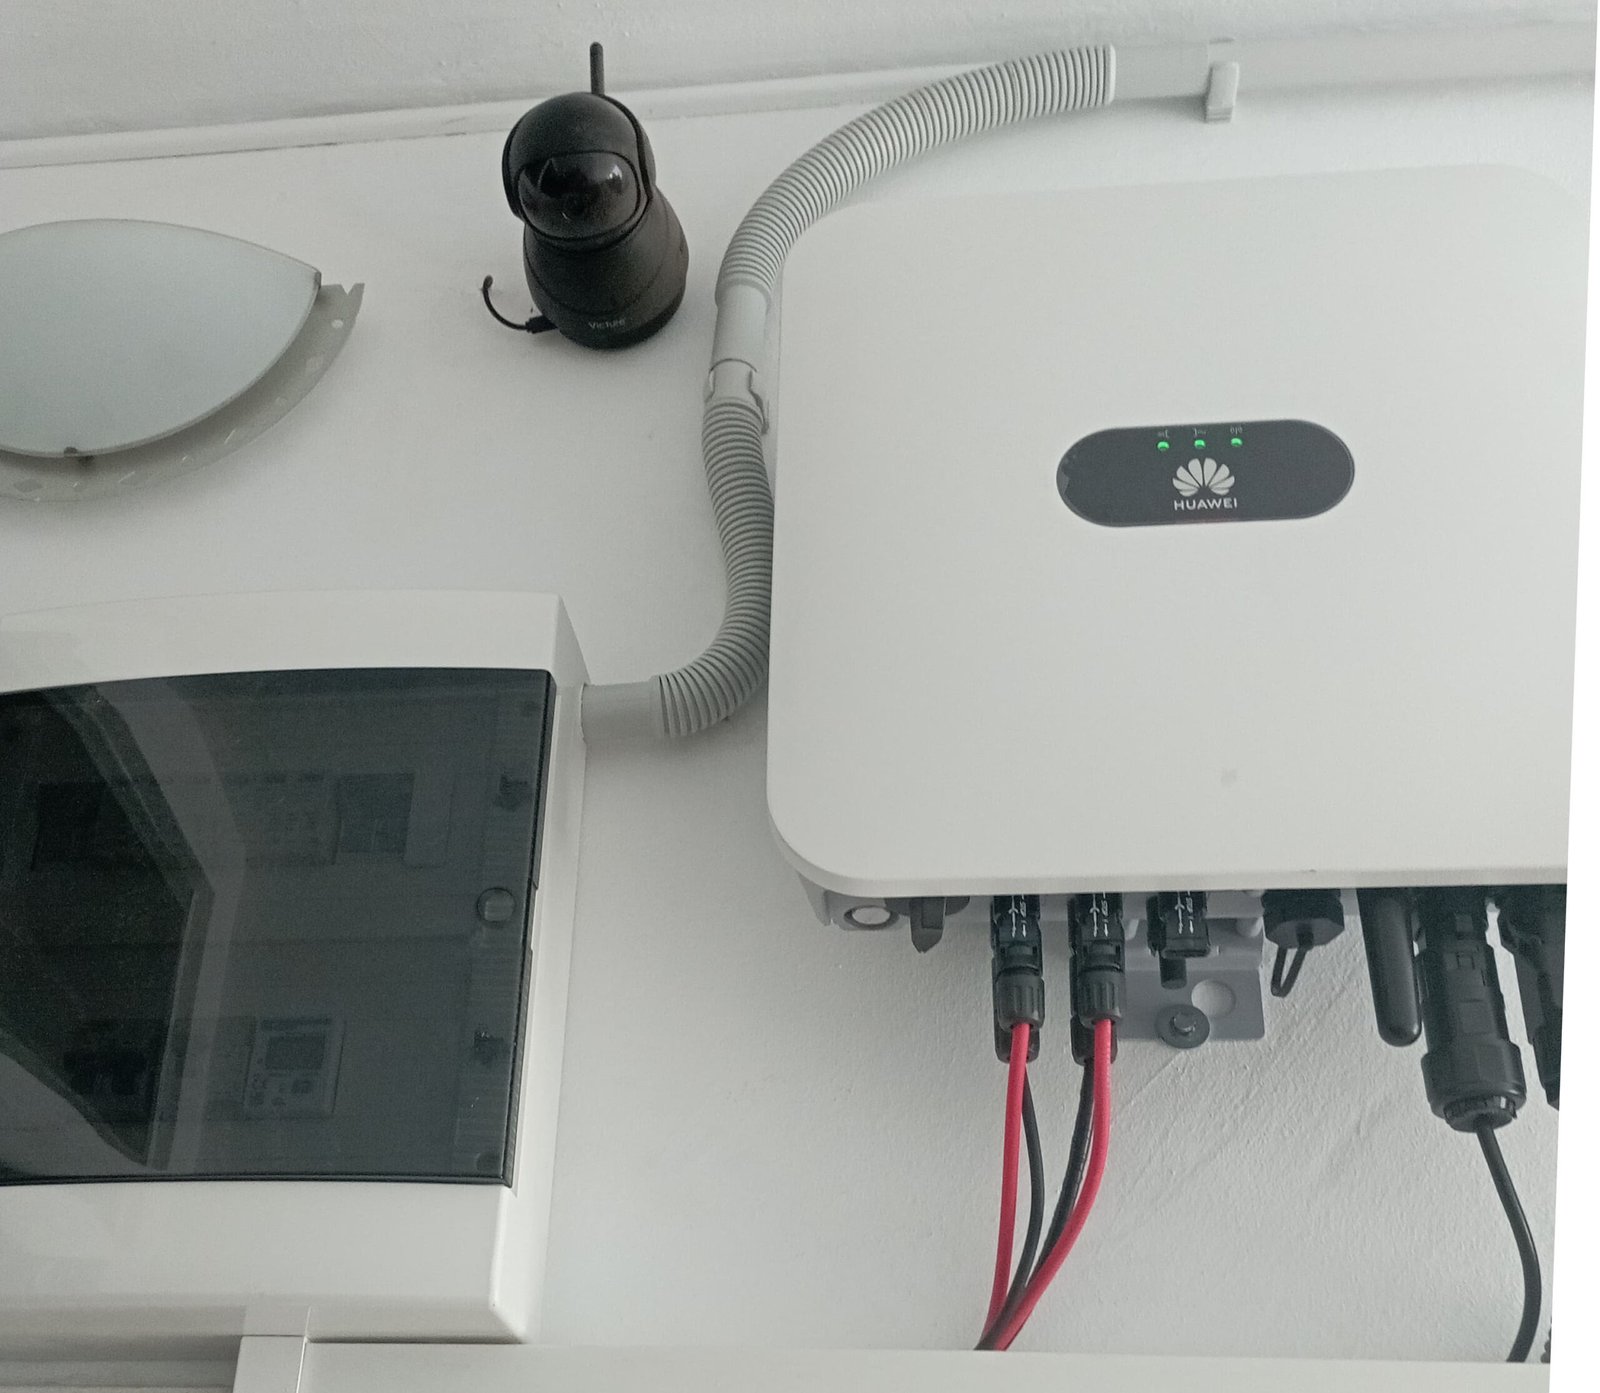 Inverter connected to electricity supply